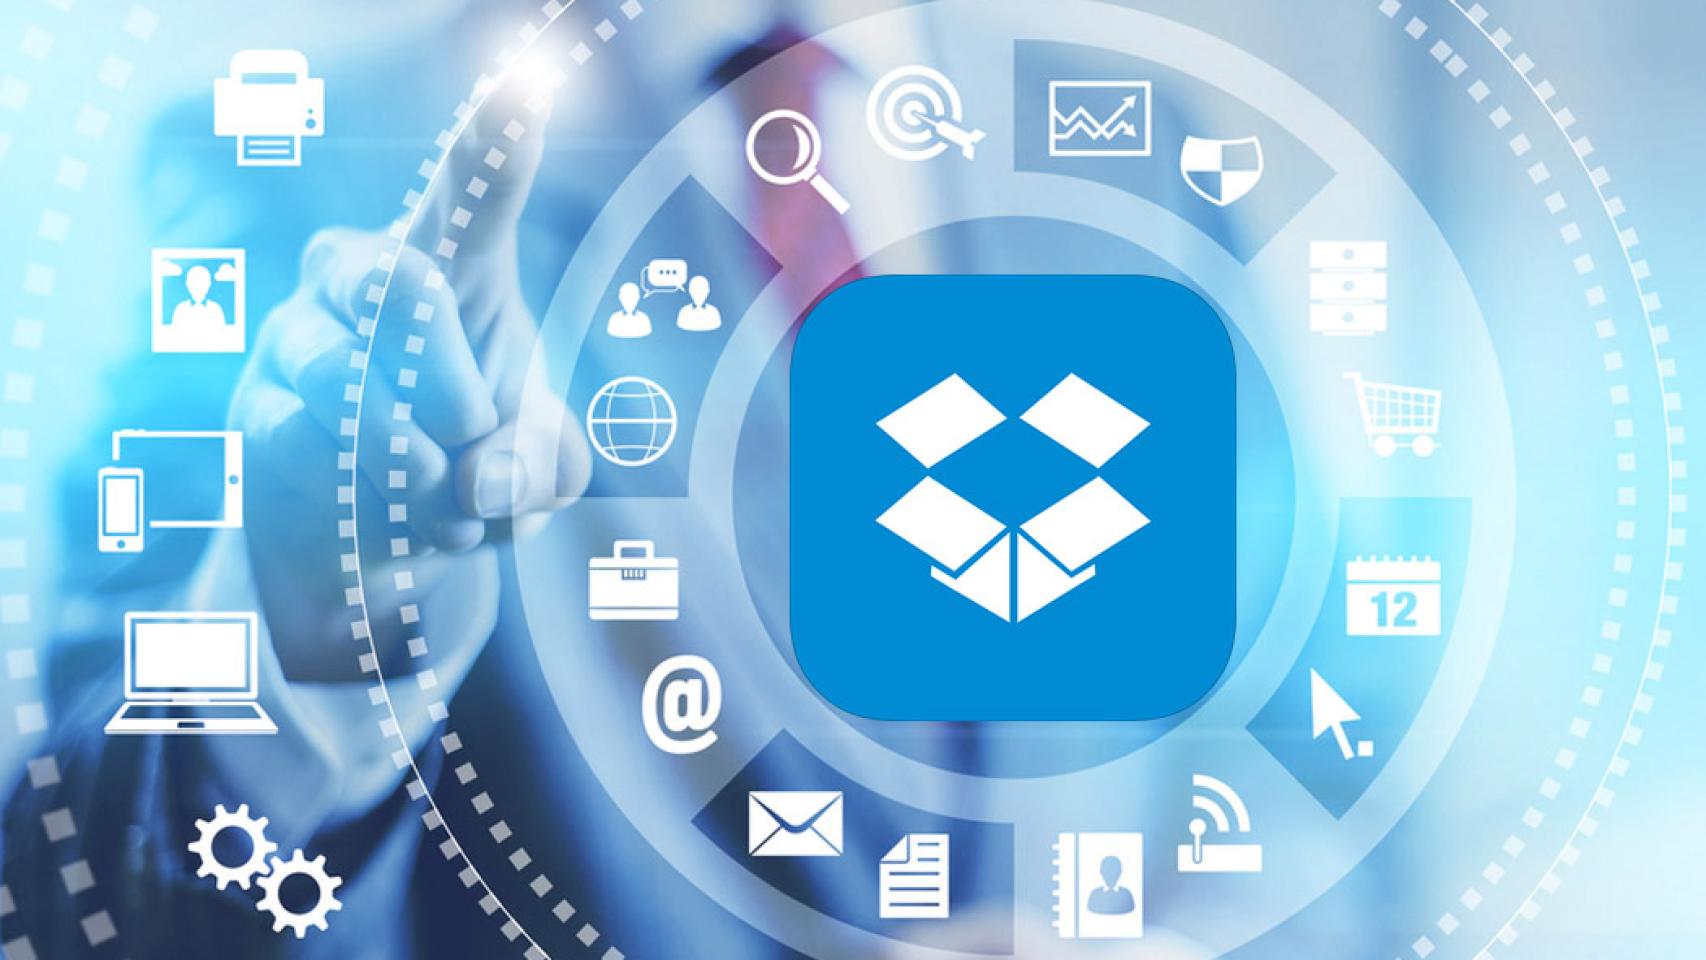 what is dropbox app android